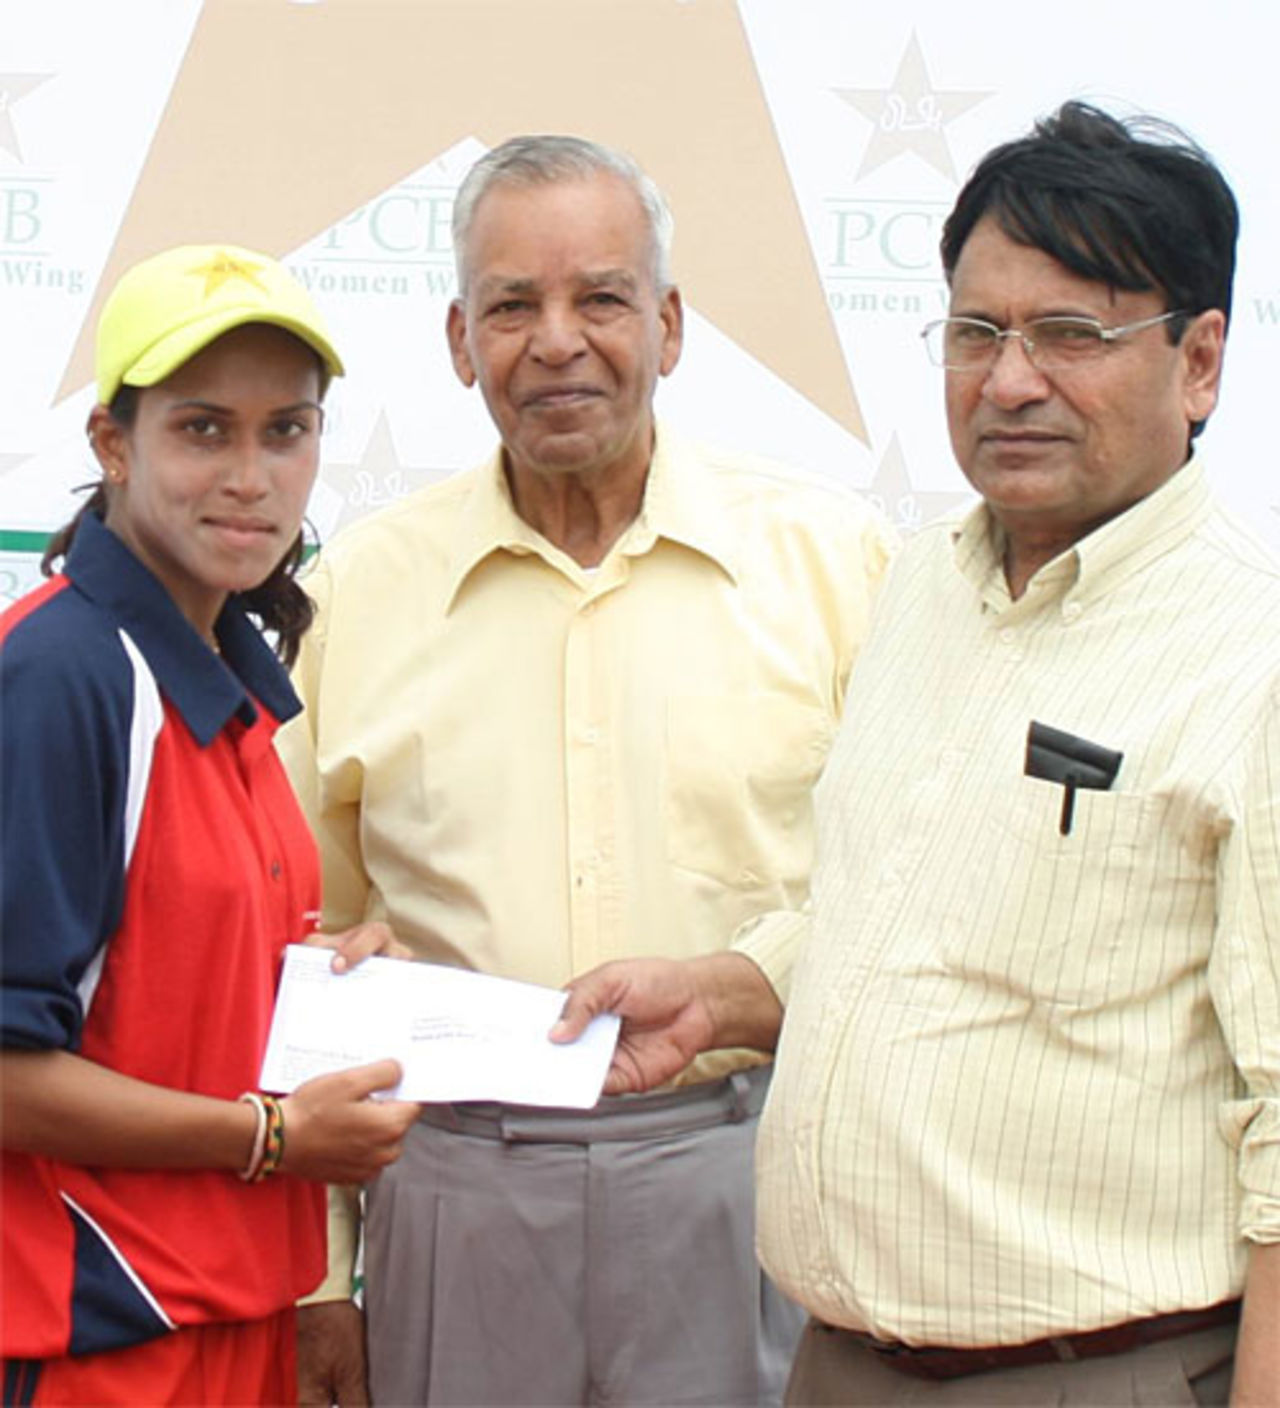 South Zone player Nain Abidi picks up the Player of the Match award for their game with Central Zone Green in the first women's Twenty20 Quadrangular Championship in Pakistan 